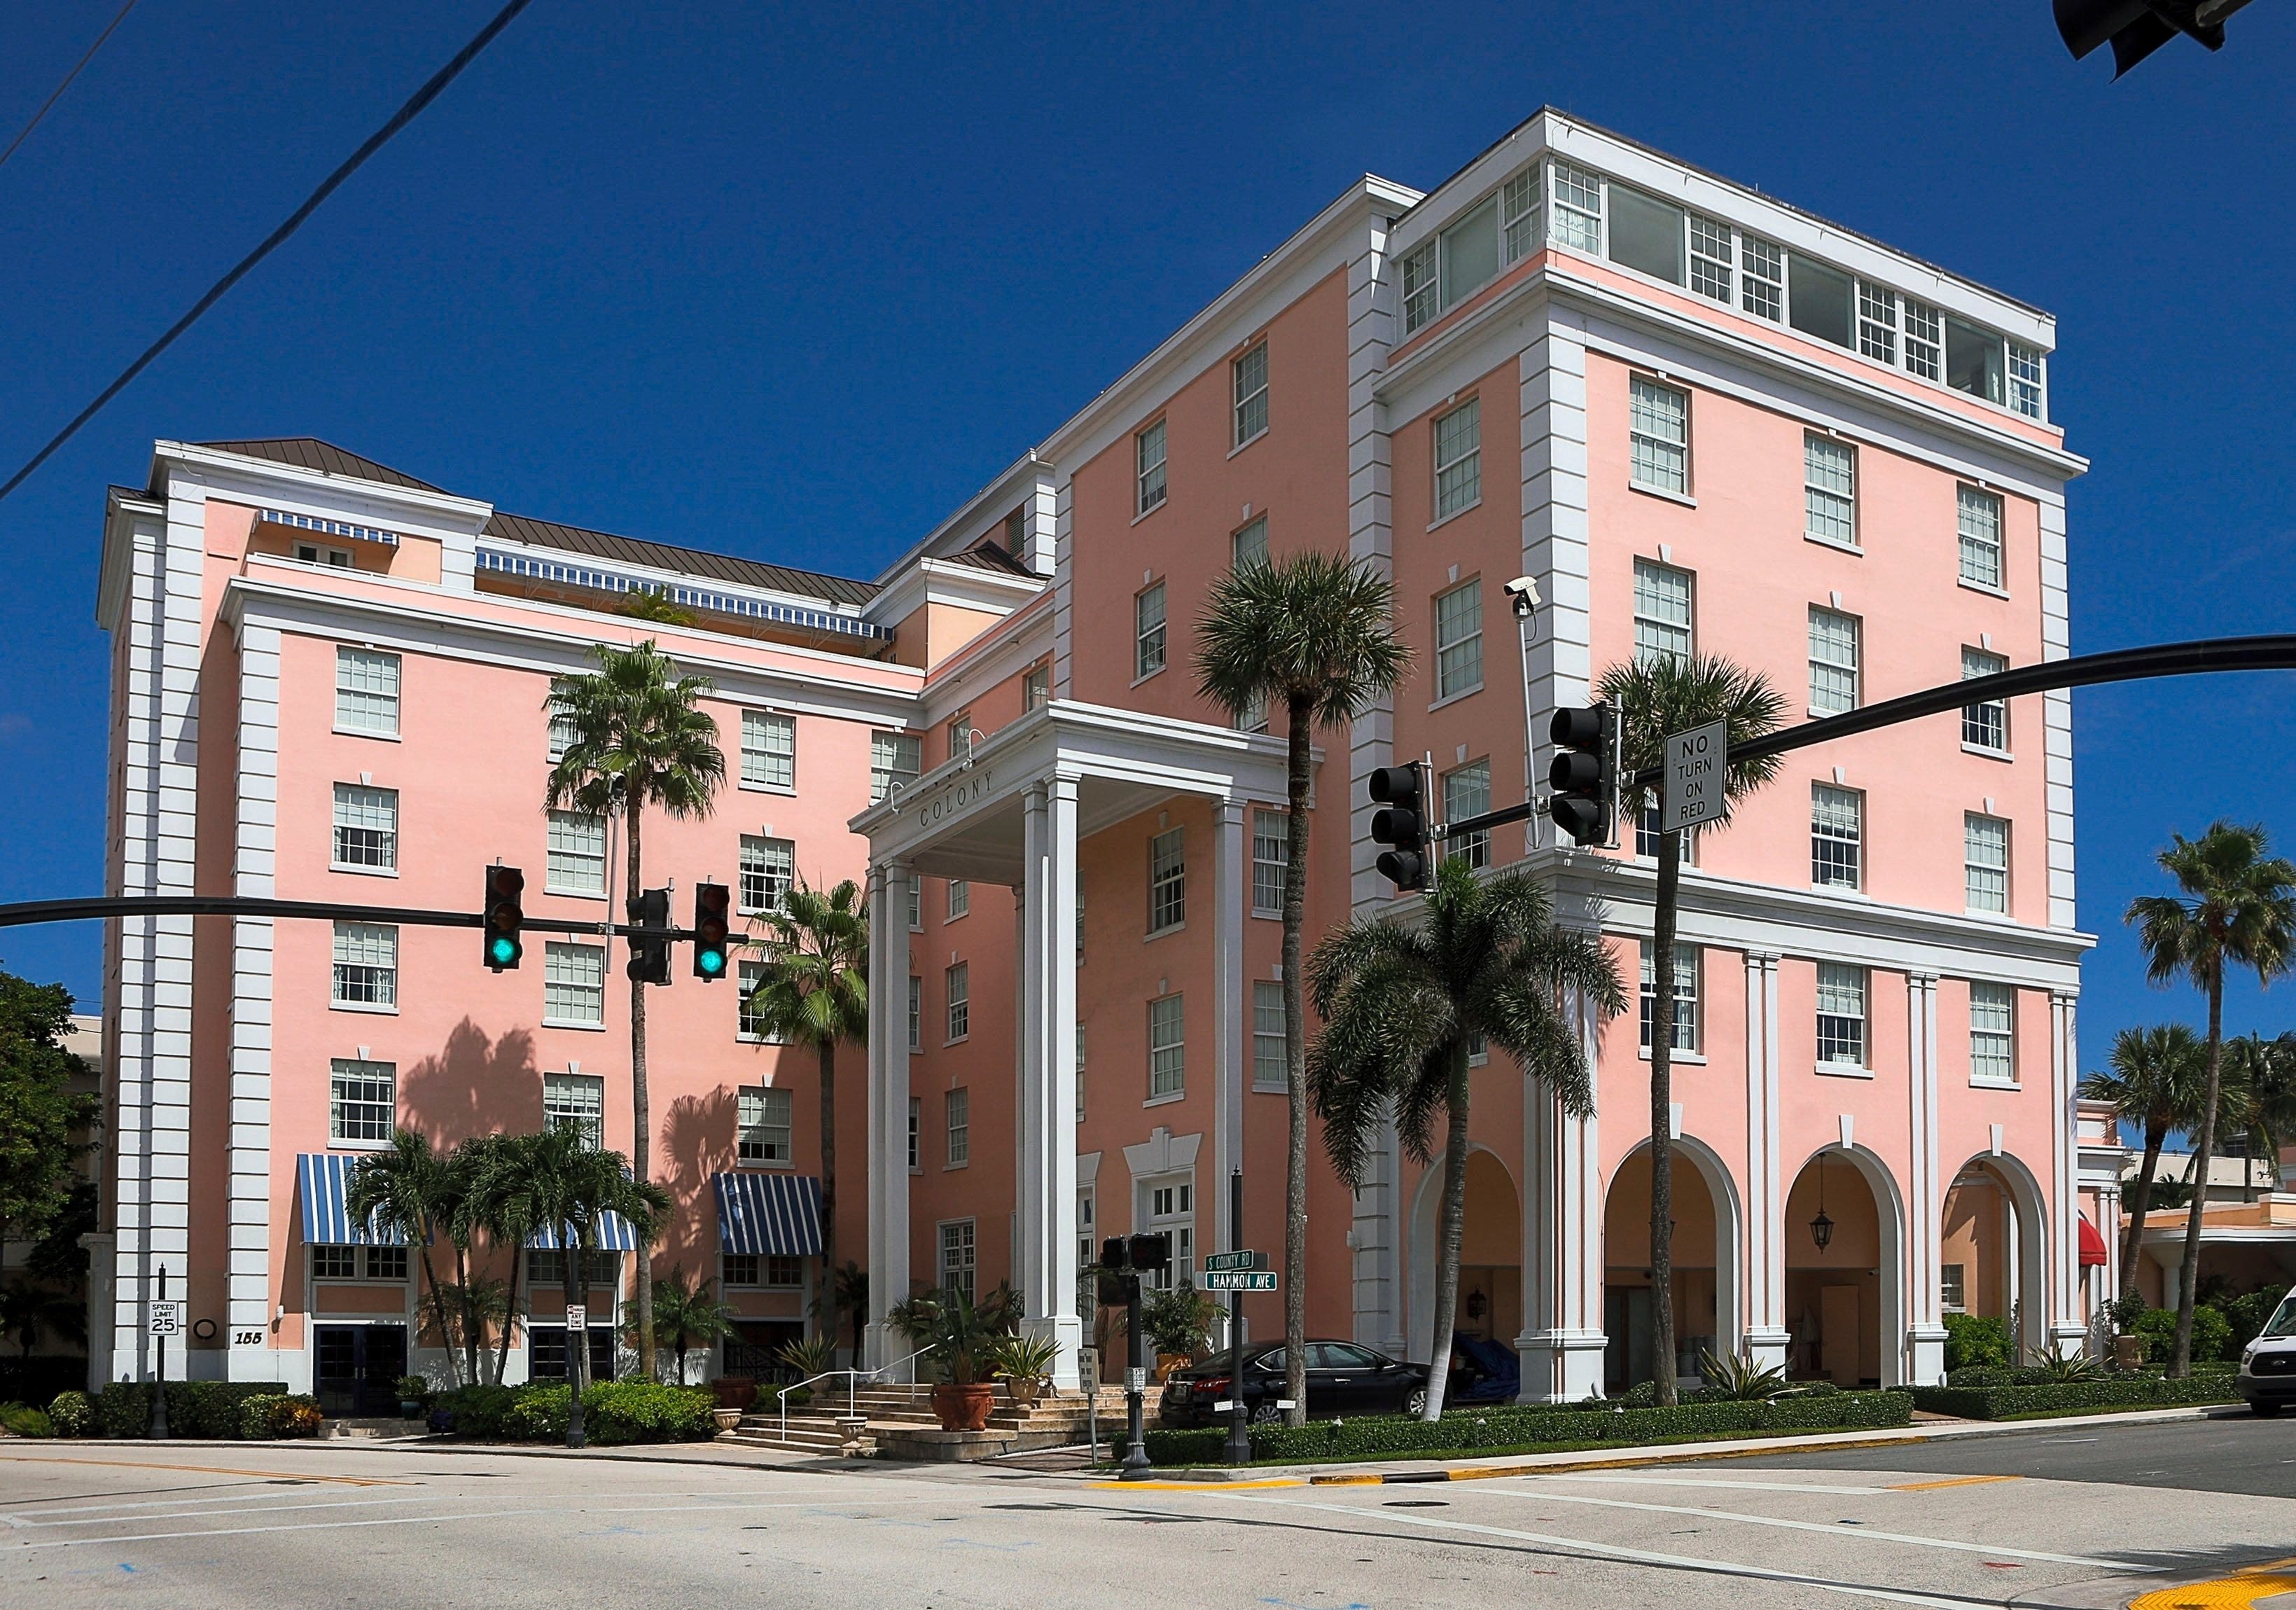 Colony Hotel in Palm Beach will remain open for summer, in shift from recent practice